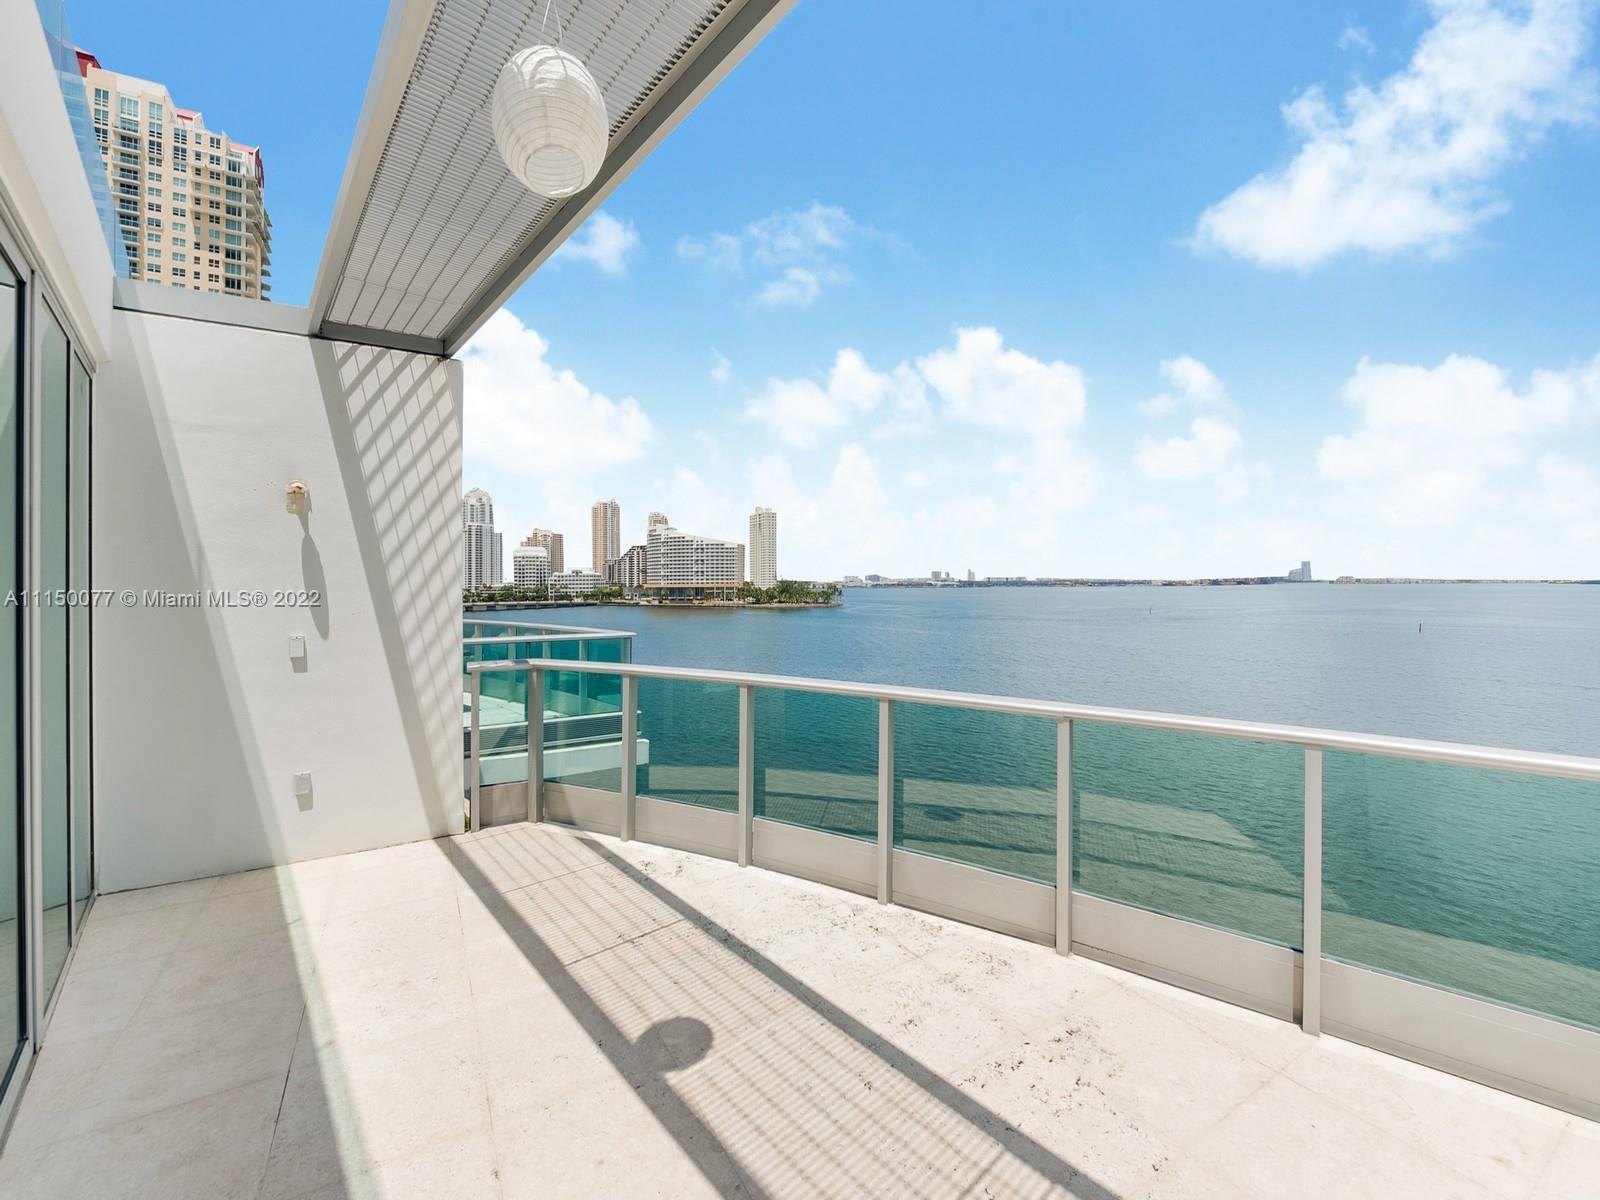 One of a kind direct bay views from every room in this three-level loft at the Jade. A spacious livi